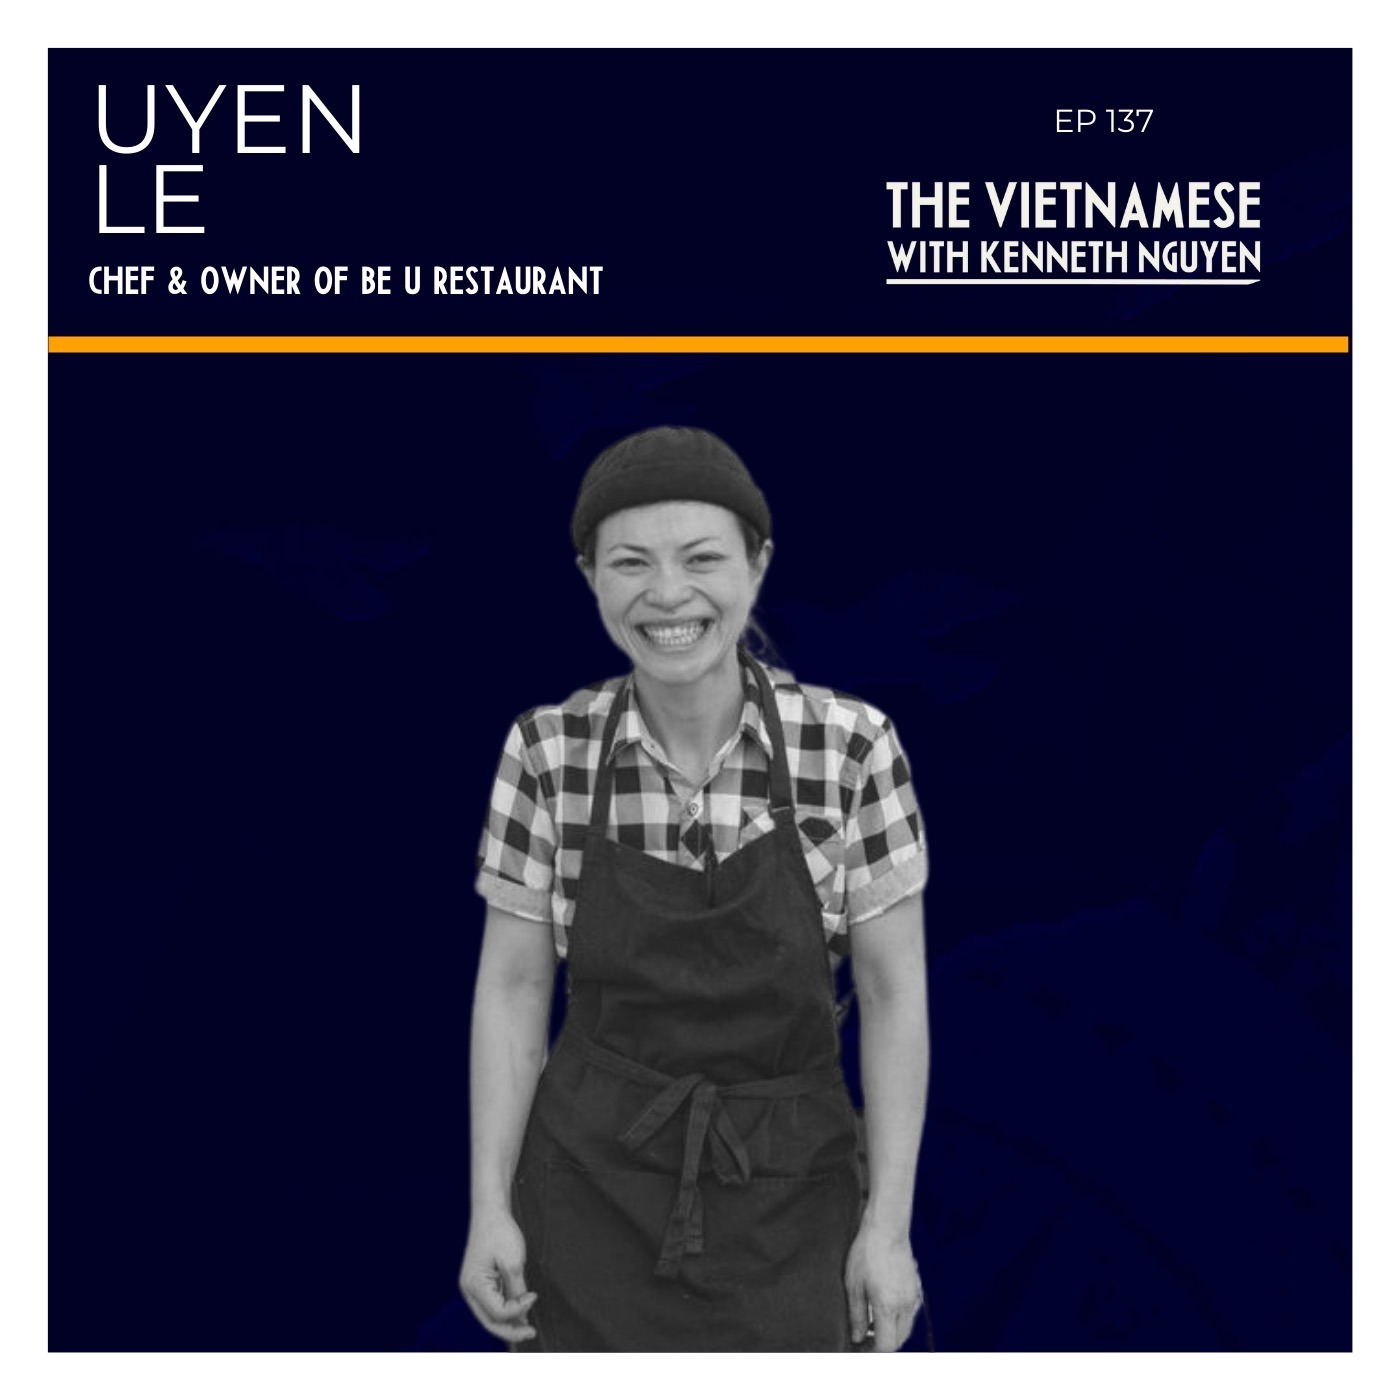 137 - Uyen Le - How can restaurants be a workplace where we can prioritize humanity?